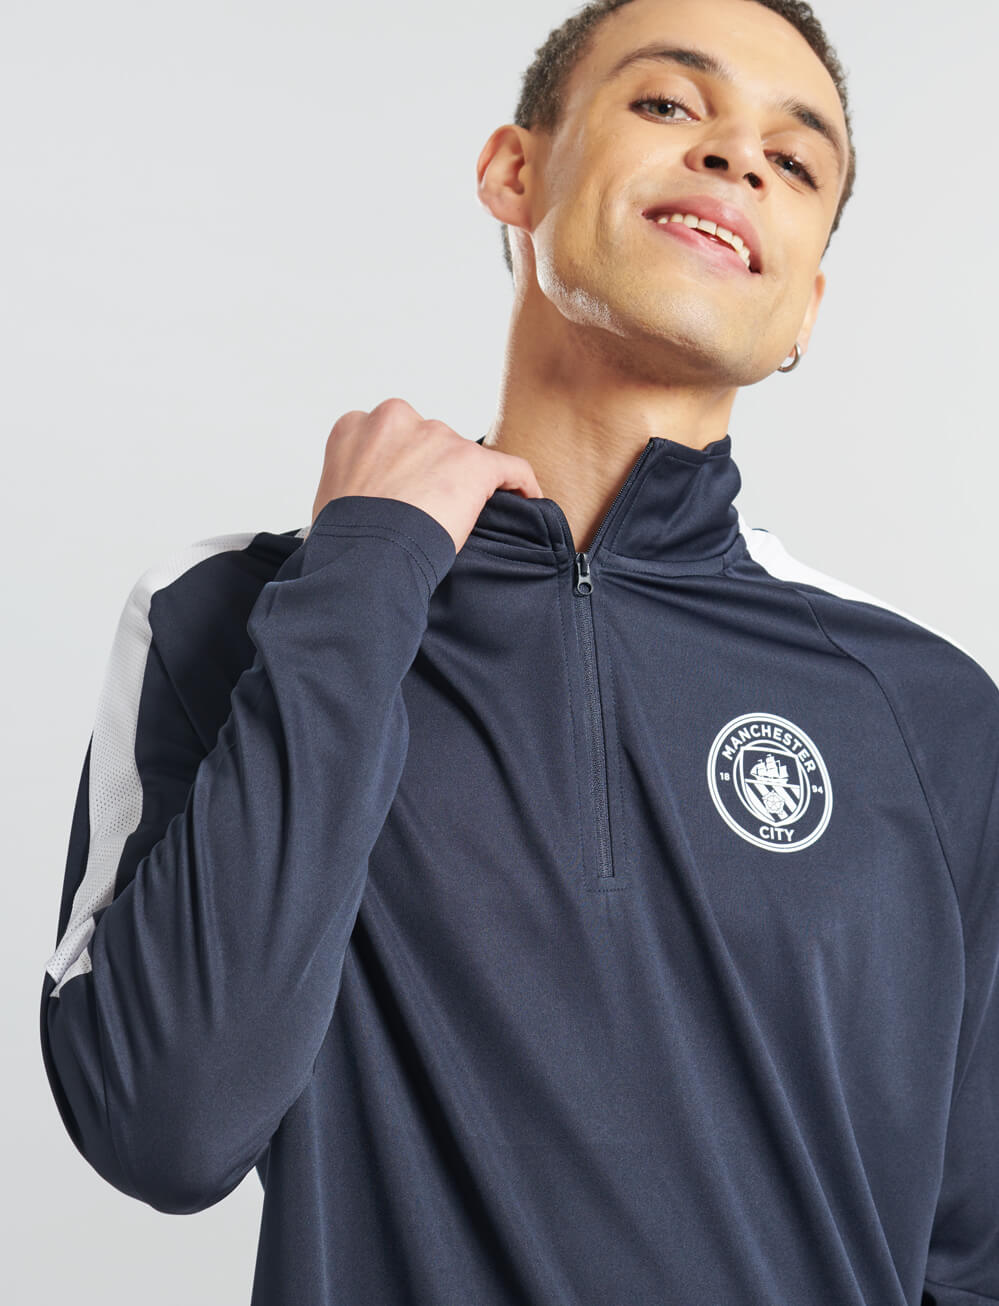 Official Manchester City 1/4 Zip Track Top - Navy - The World Football Store